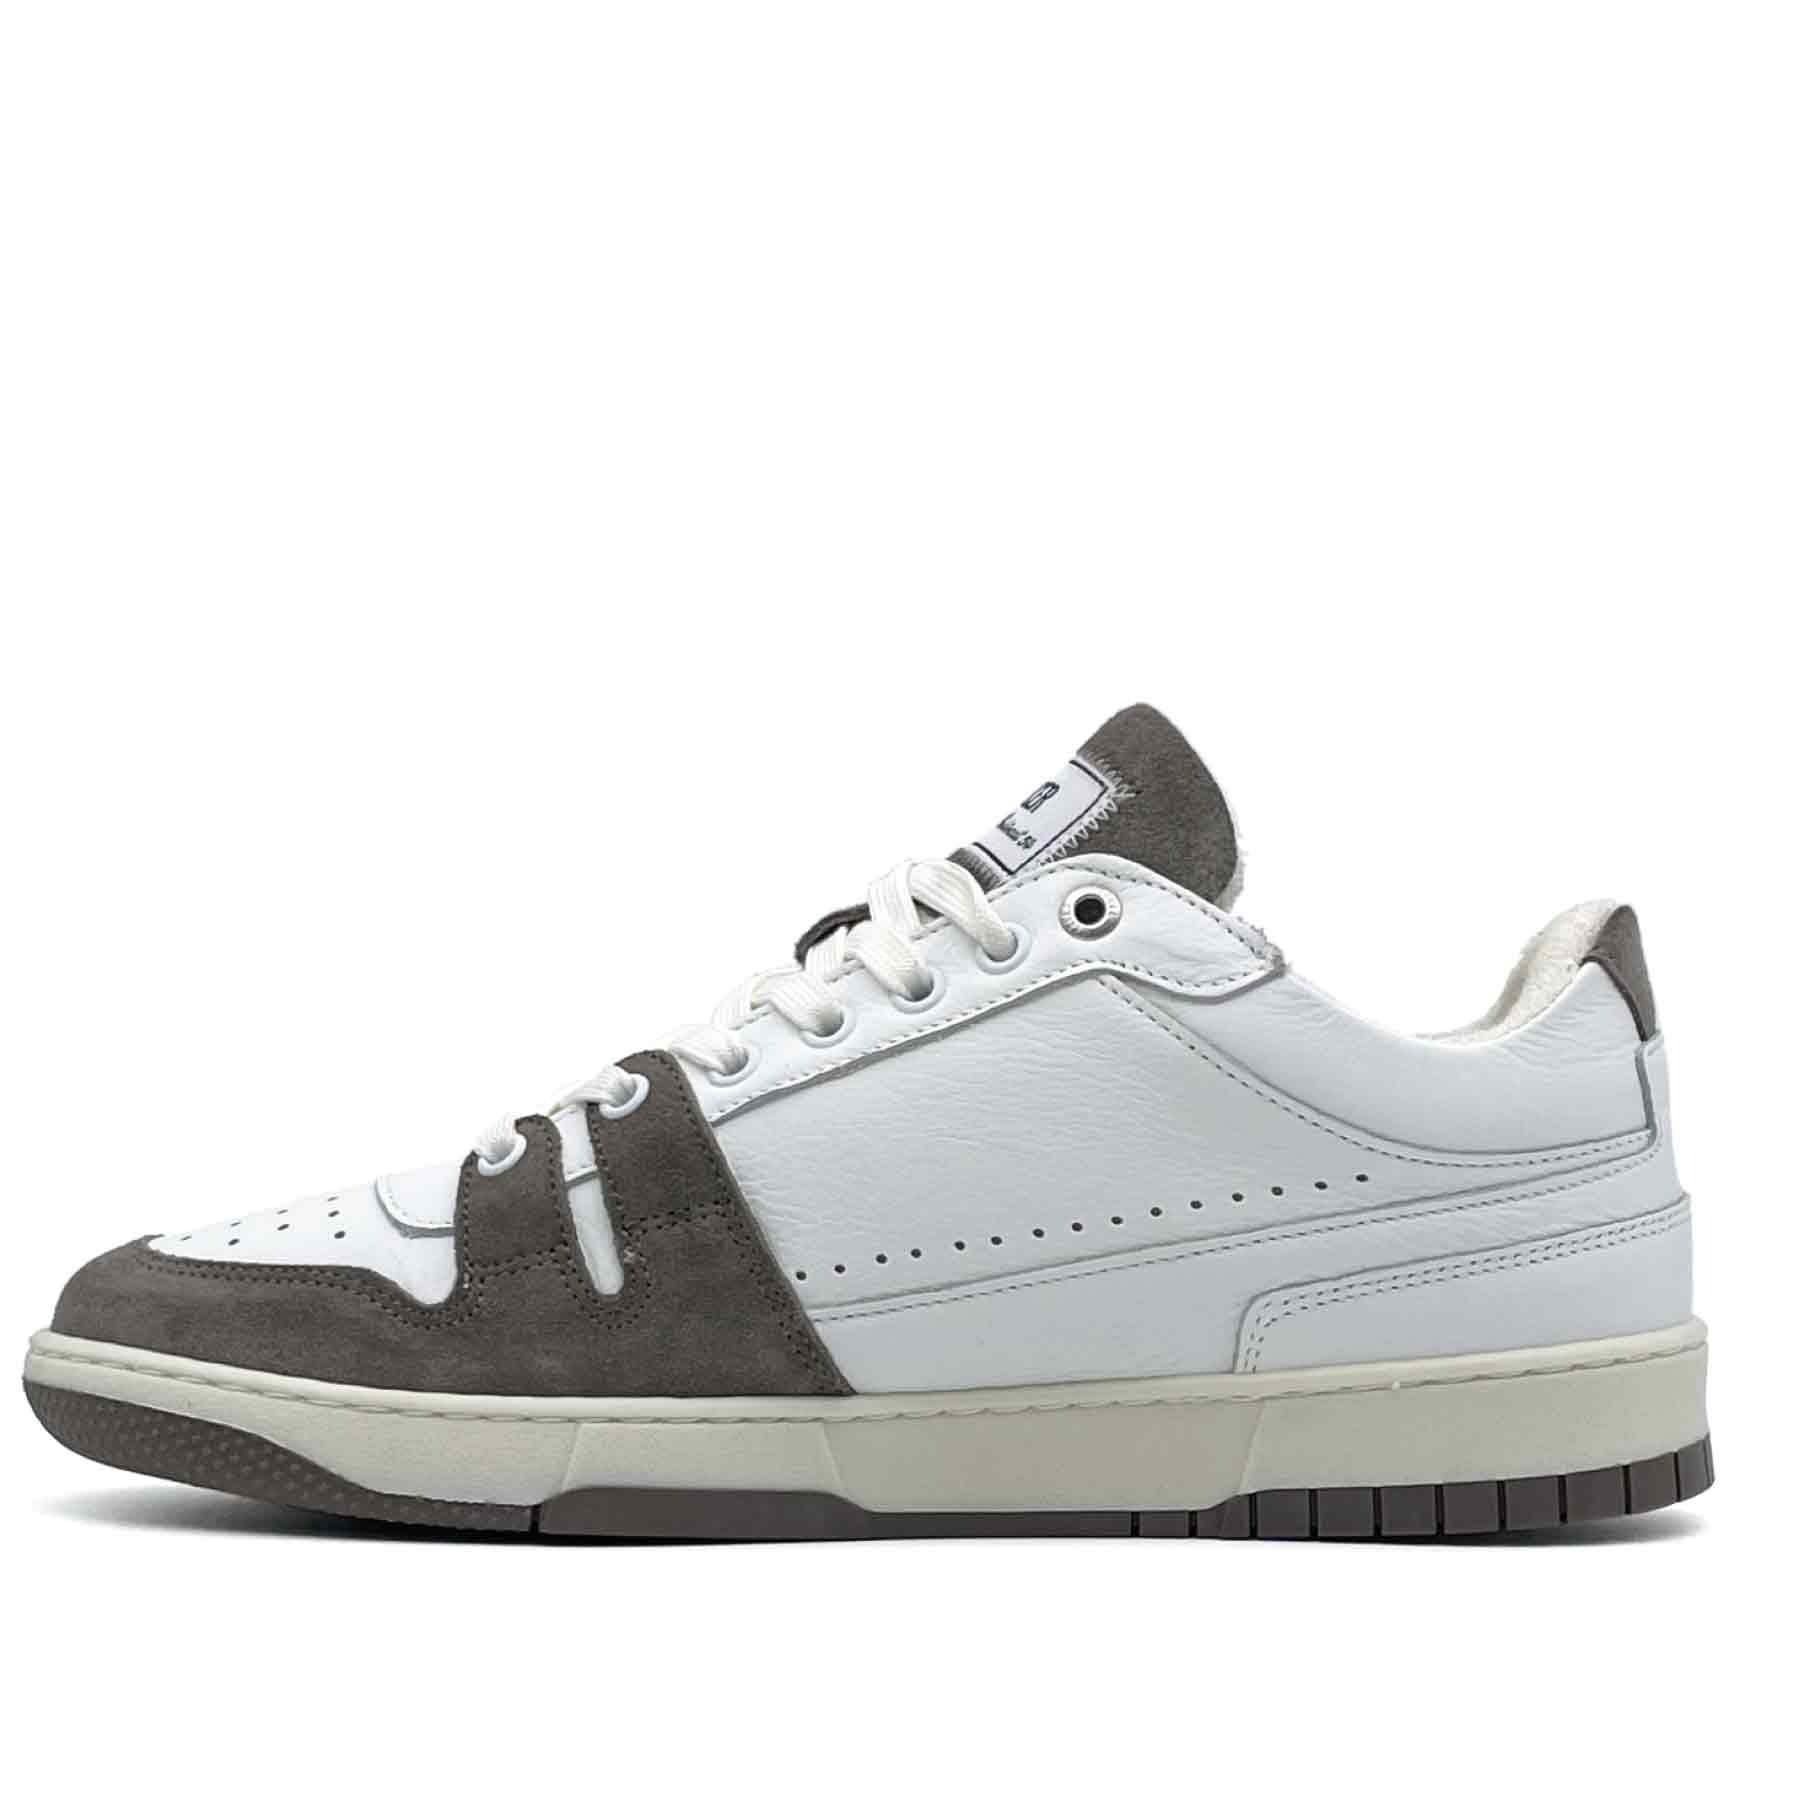 The Brooklyn Vintage White / Taupe